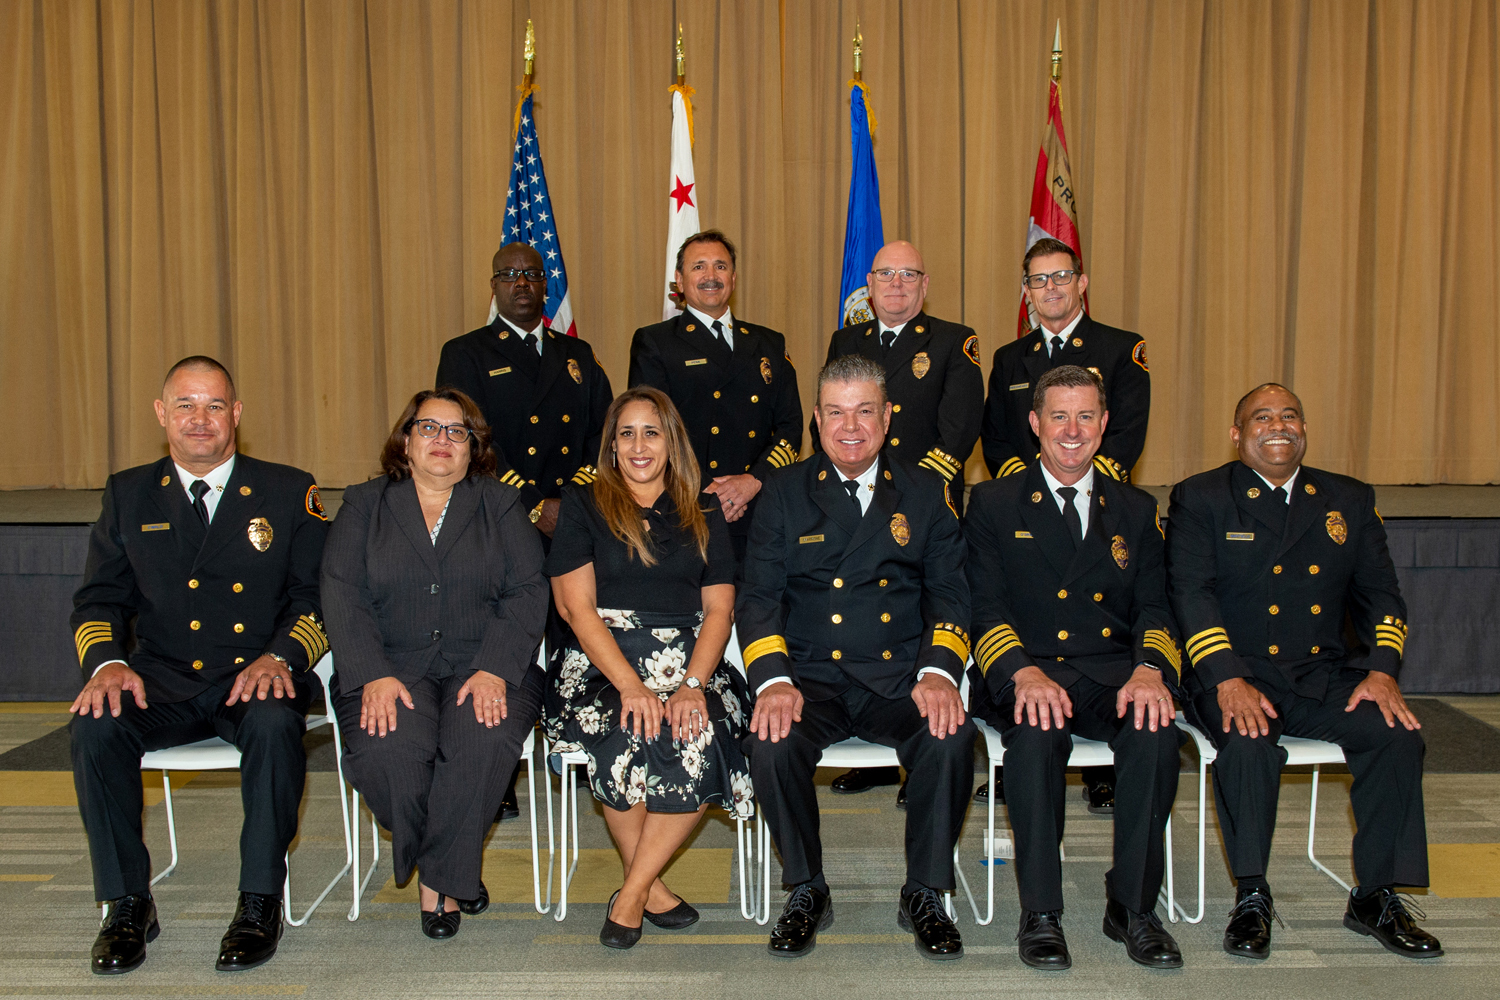 The Los Angeles County Fire Department (LACoFD) hosted a Promotional Ceremony on Wednesday, October 19, 2022, at the Rowland Heights Community Center.